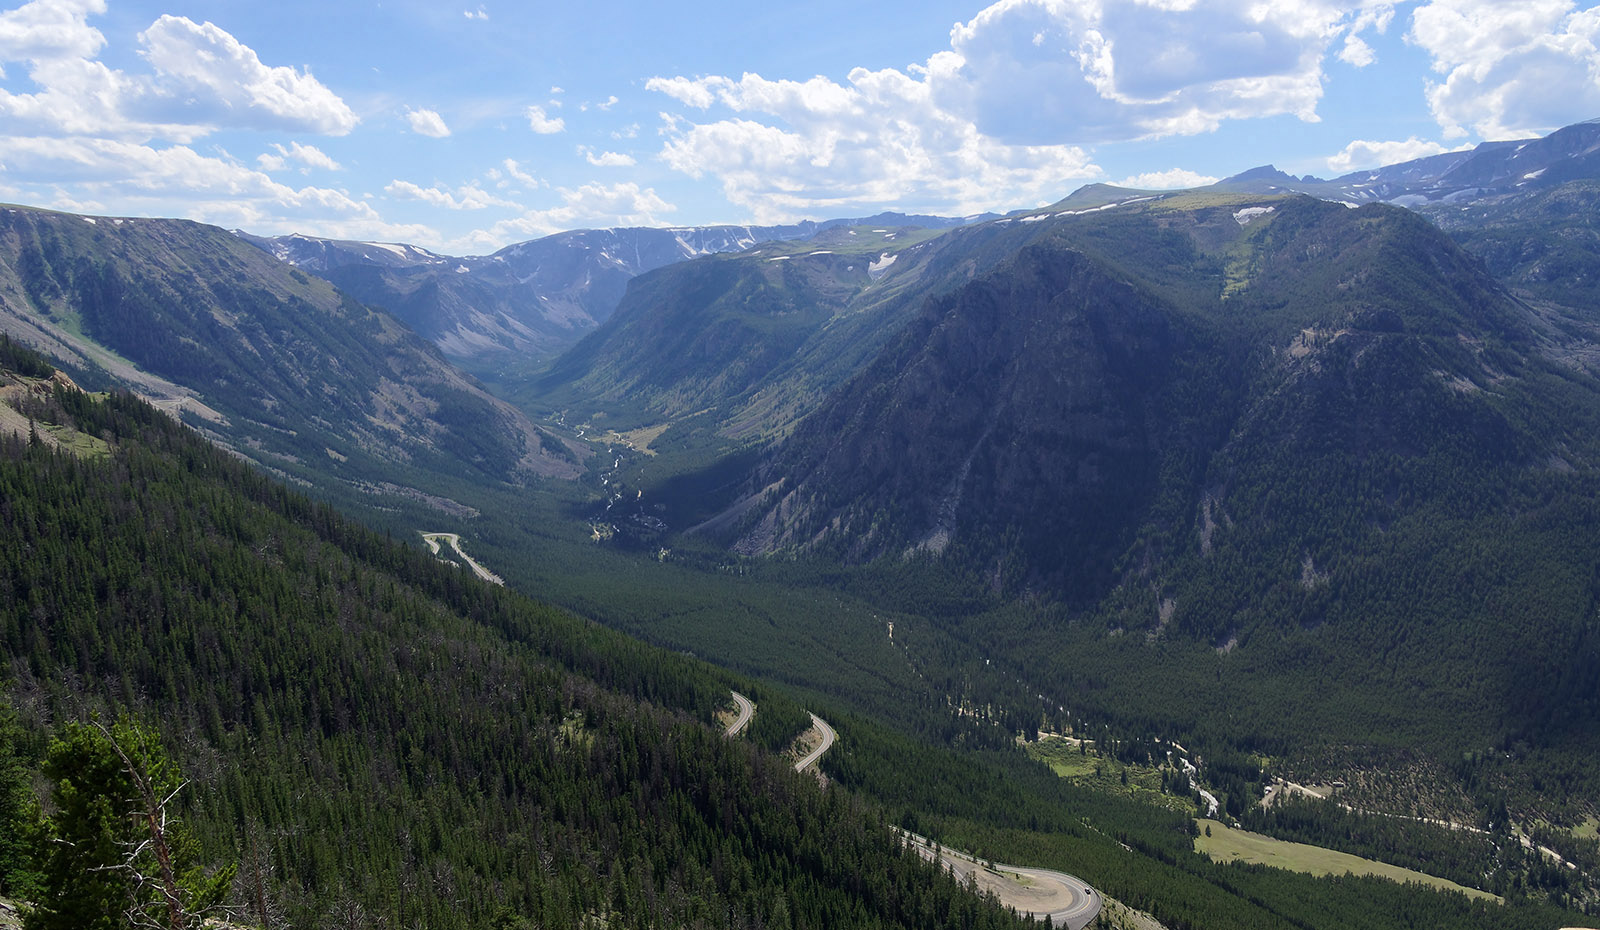 Rock Creek Valley.  The drive West from Red Lodge to Cooke City on Hwy 212 (Beartooth Highway) gives numerous views of this glacier-carved valley in metamorphic rock.